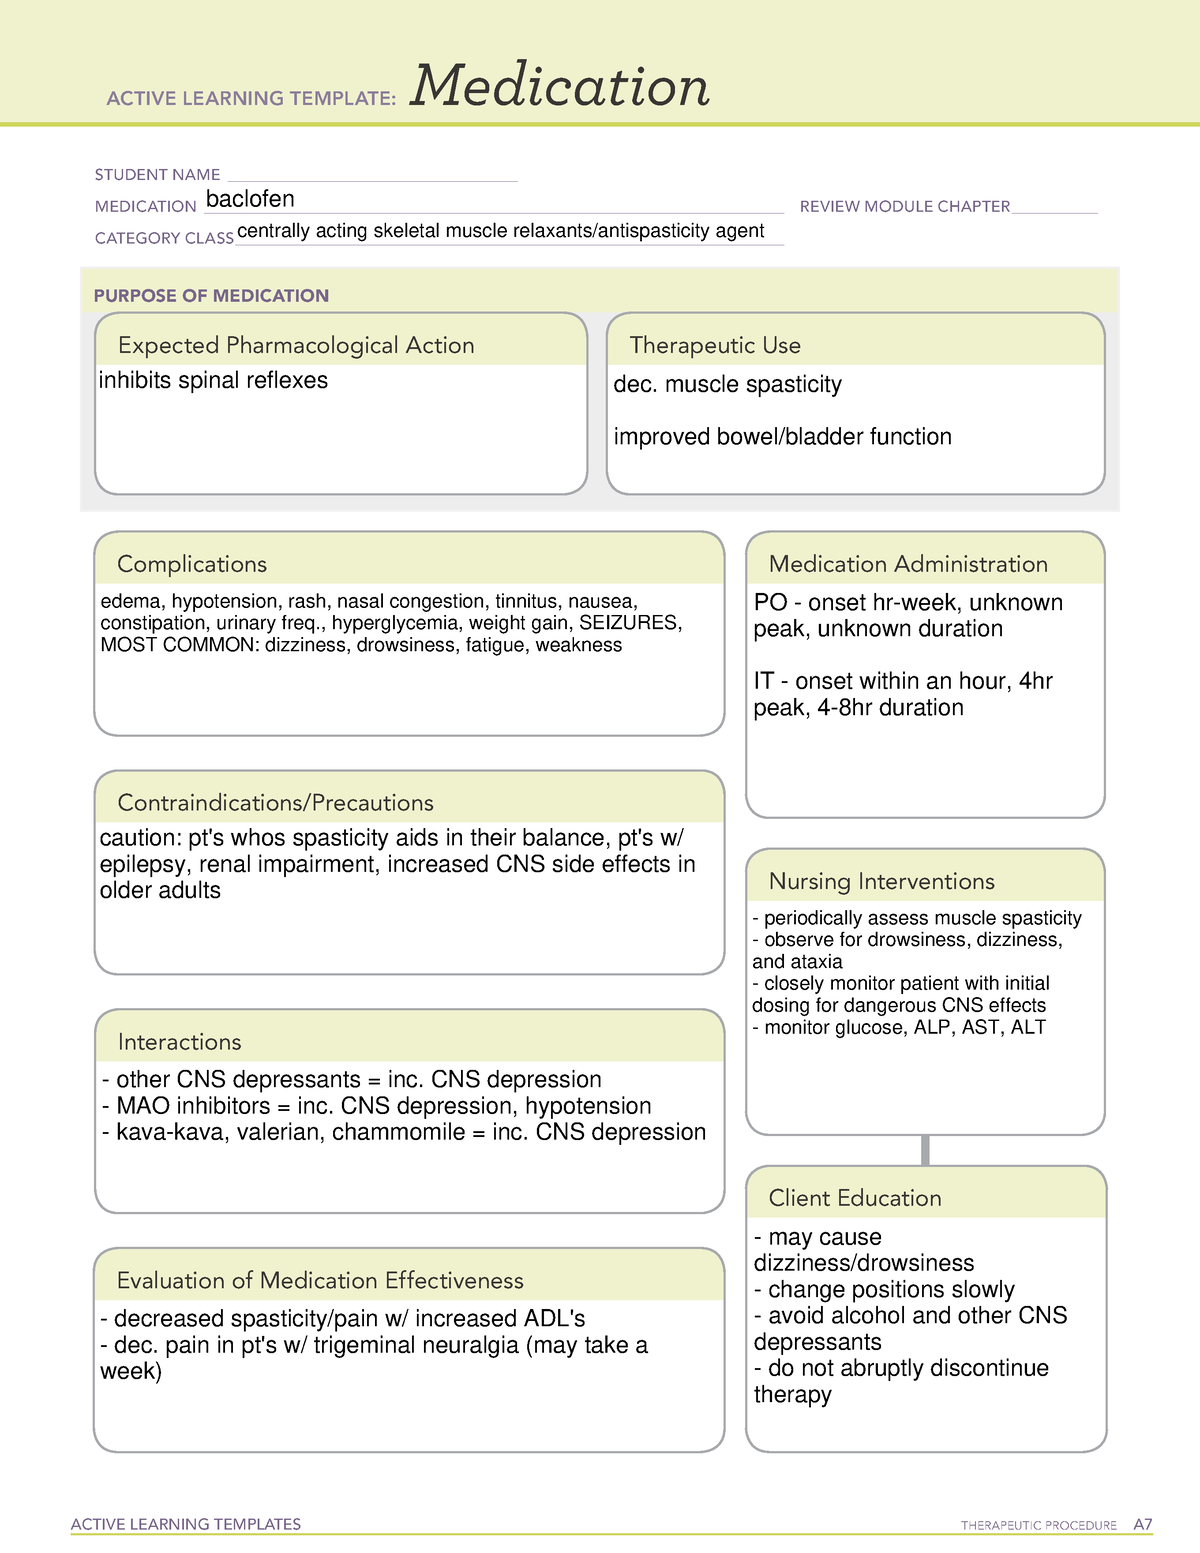 Med template baclofen ACTIVE LEARNING TEMPLATES THERAPEUTIC